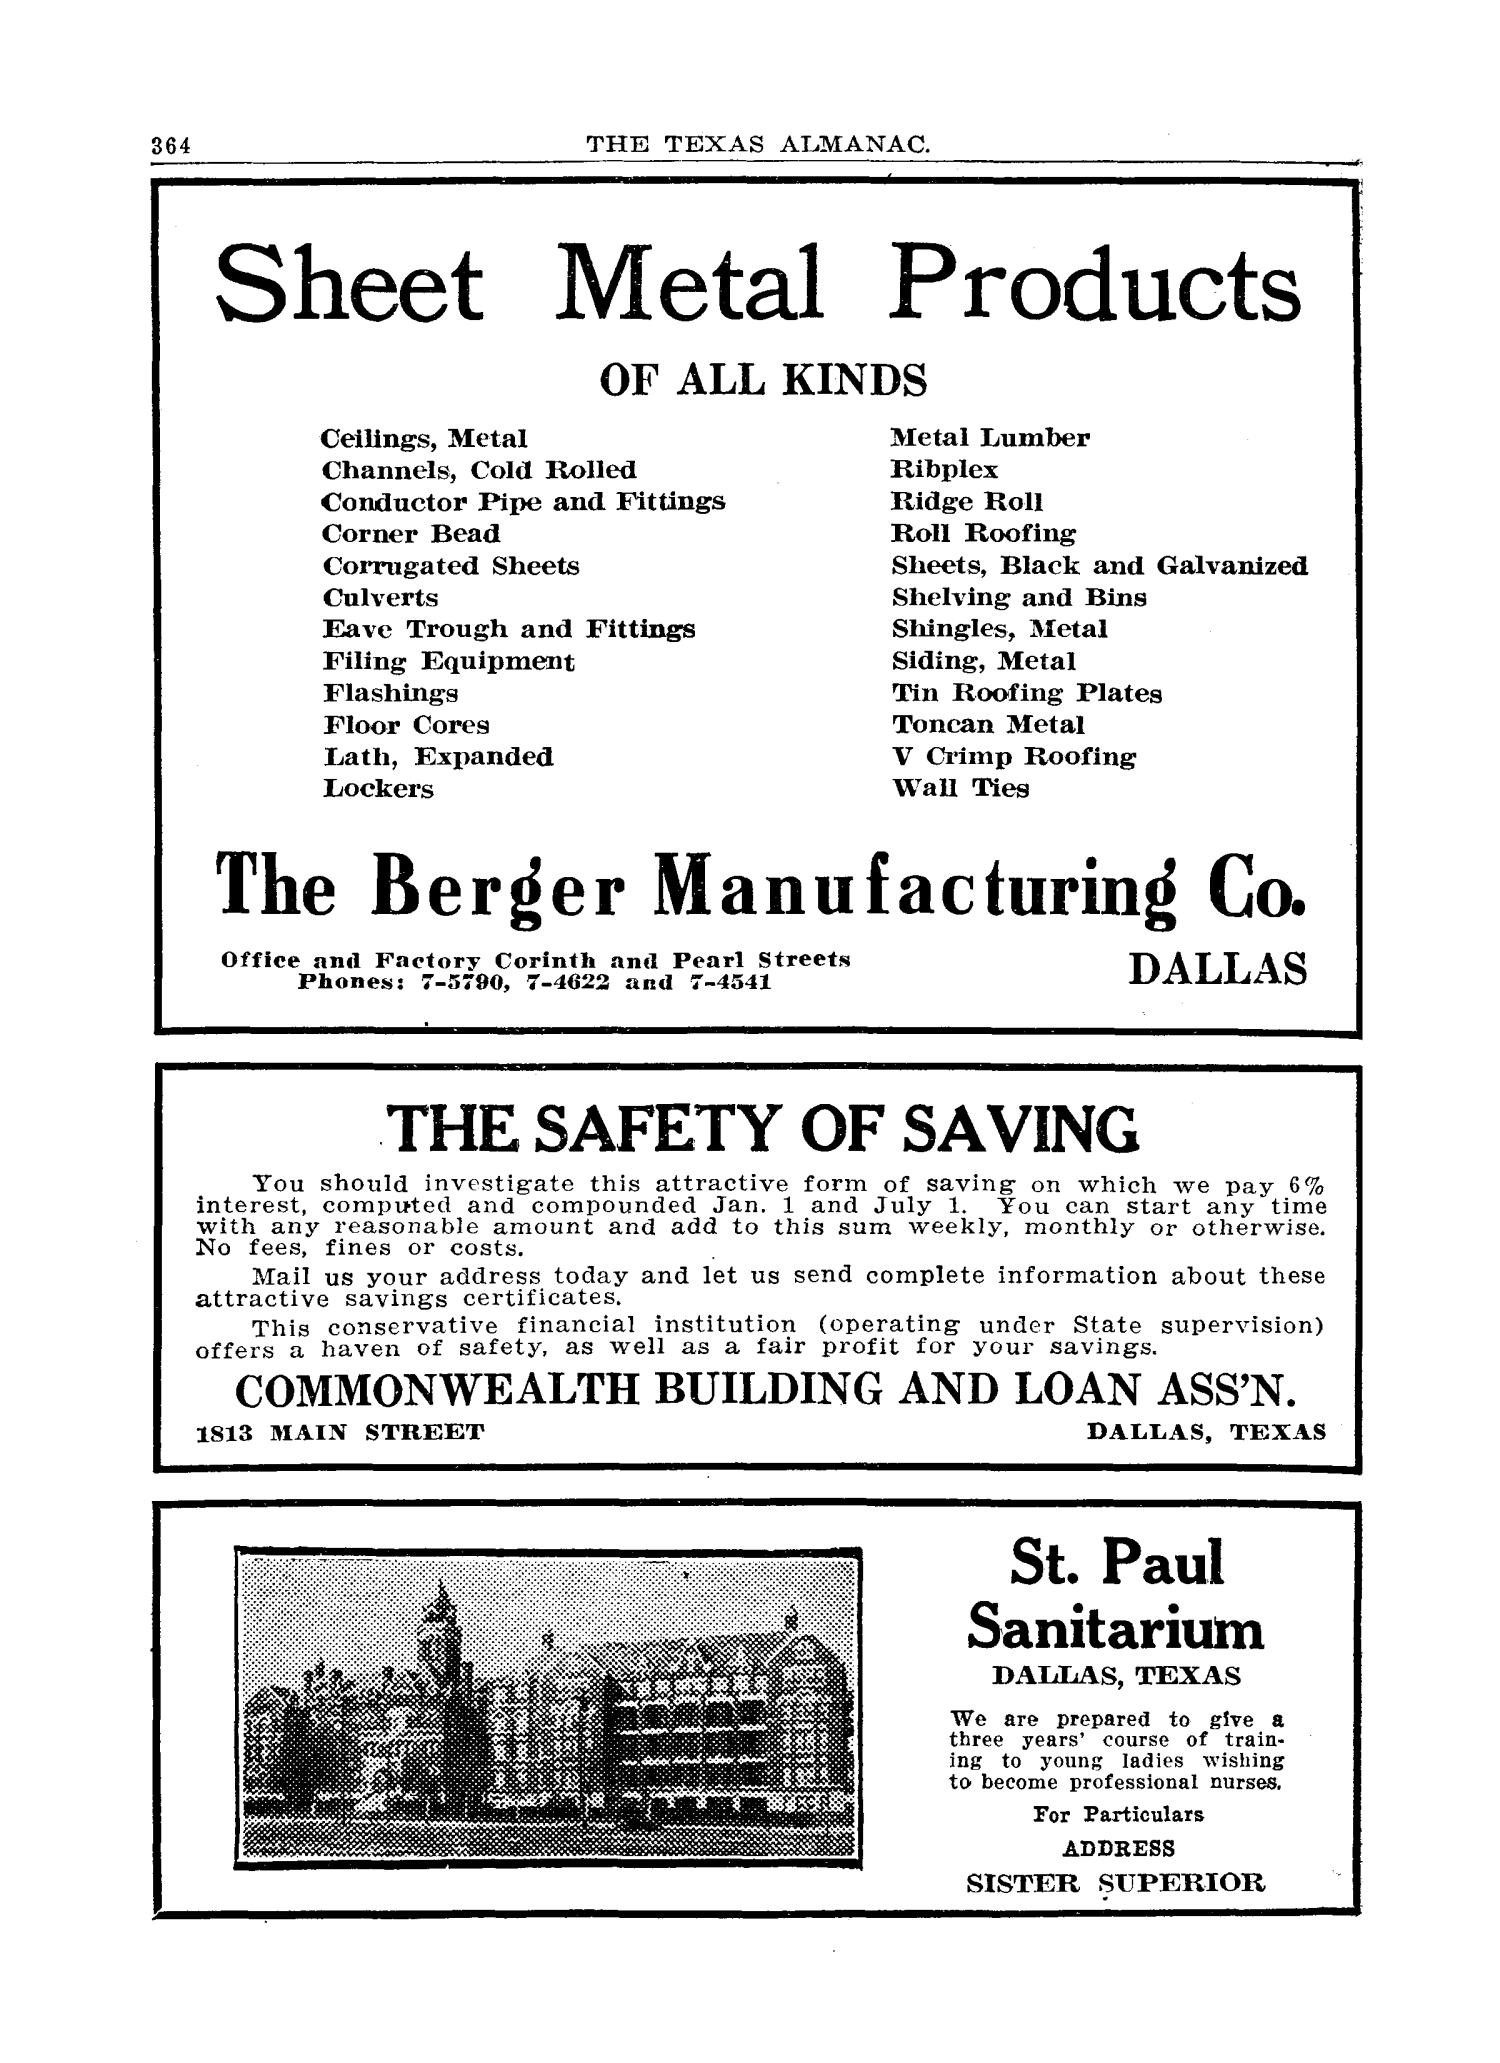 1927 The Texas Almanac and State Industrial Guide
                                                
                                                    364
                                                